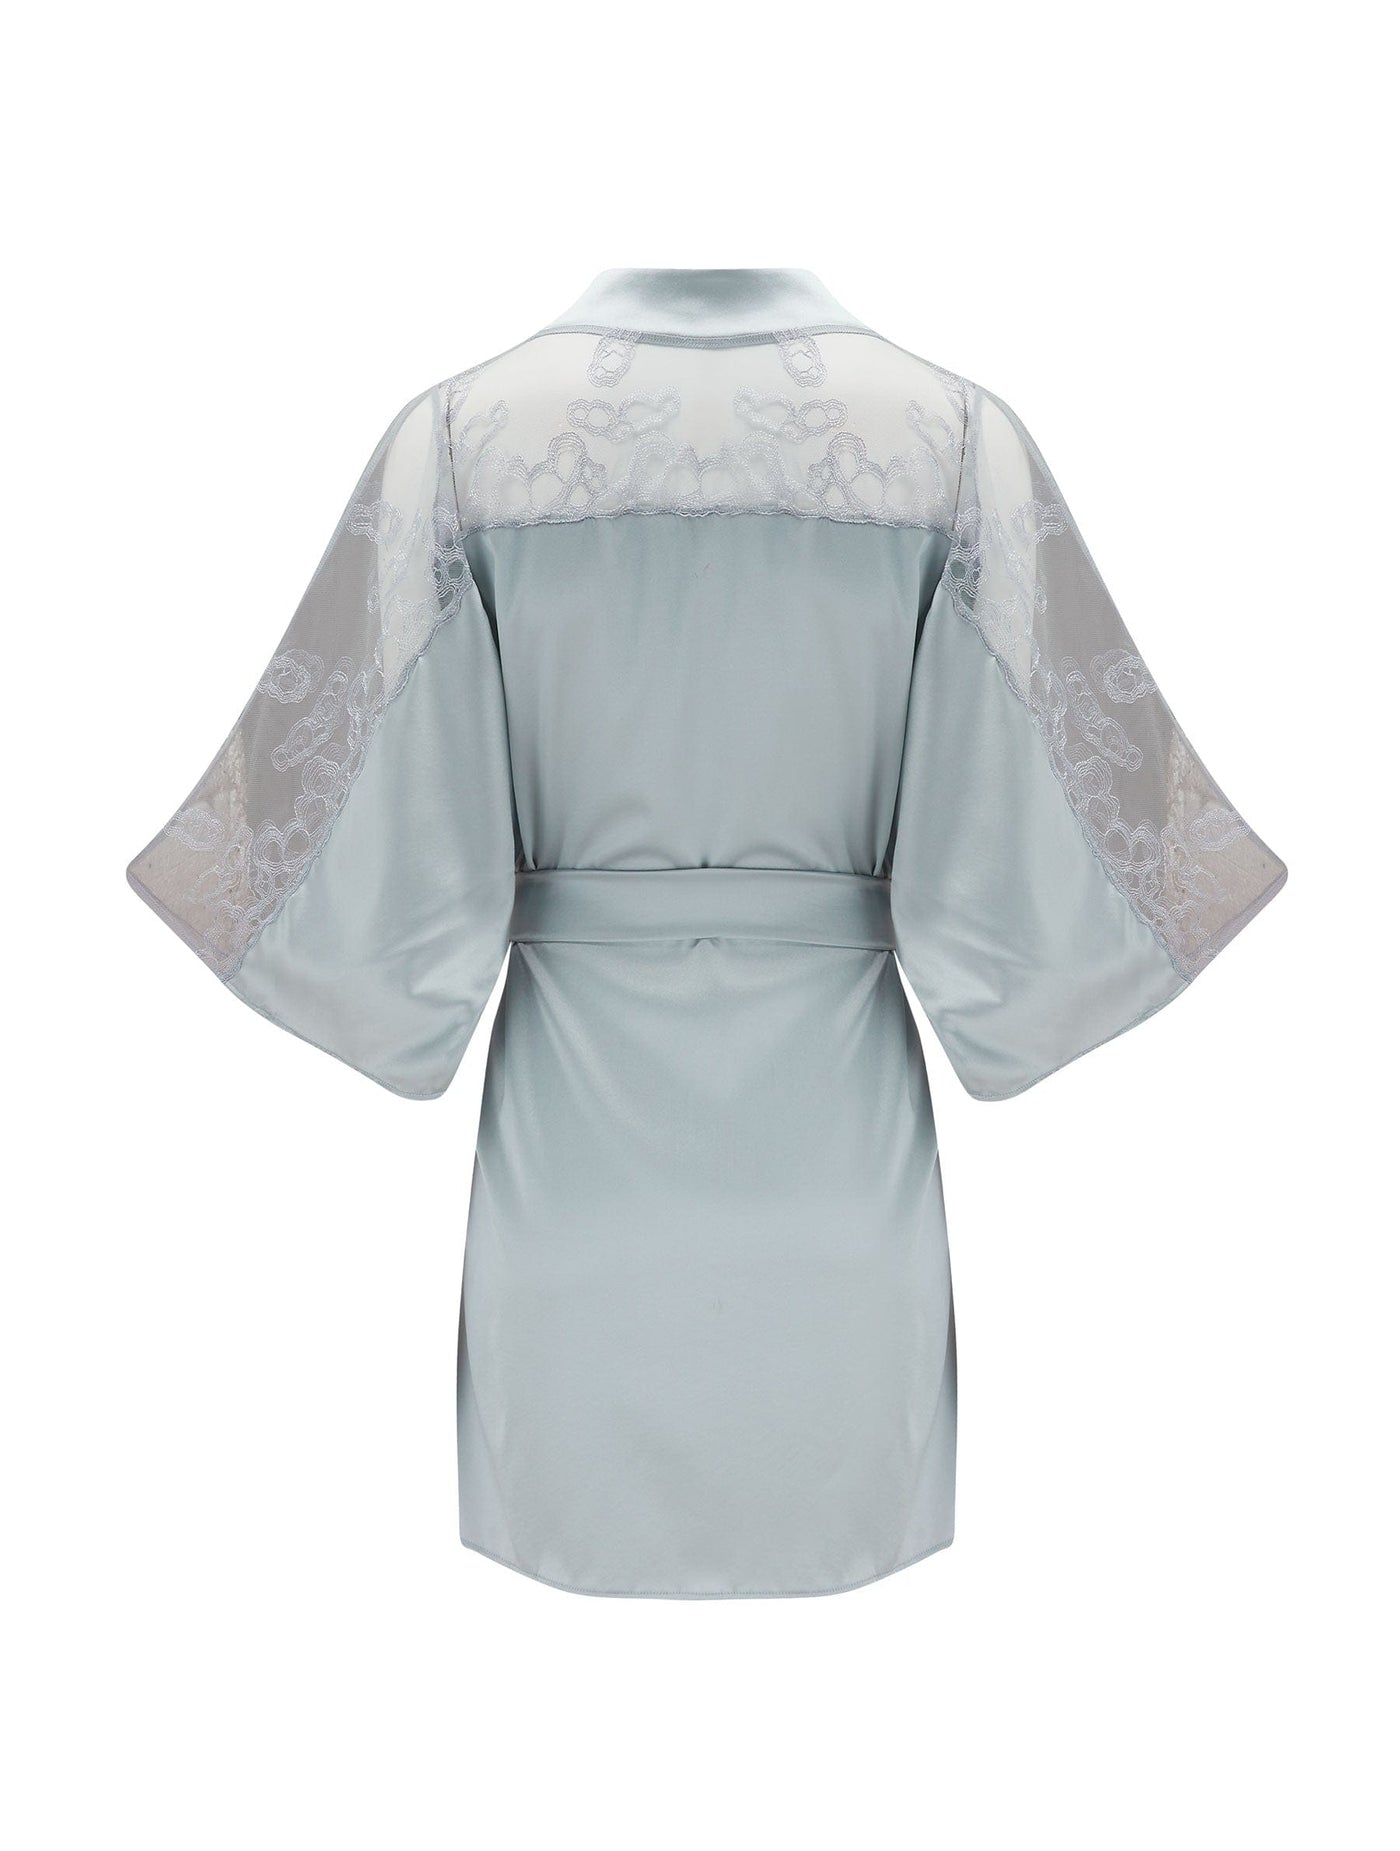 Sigrid silk robe featuring embroidery design across the back.